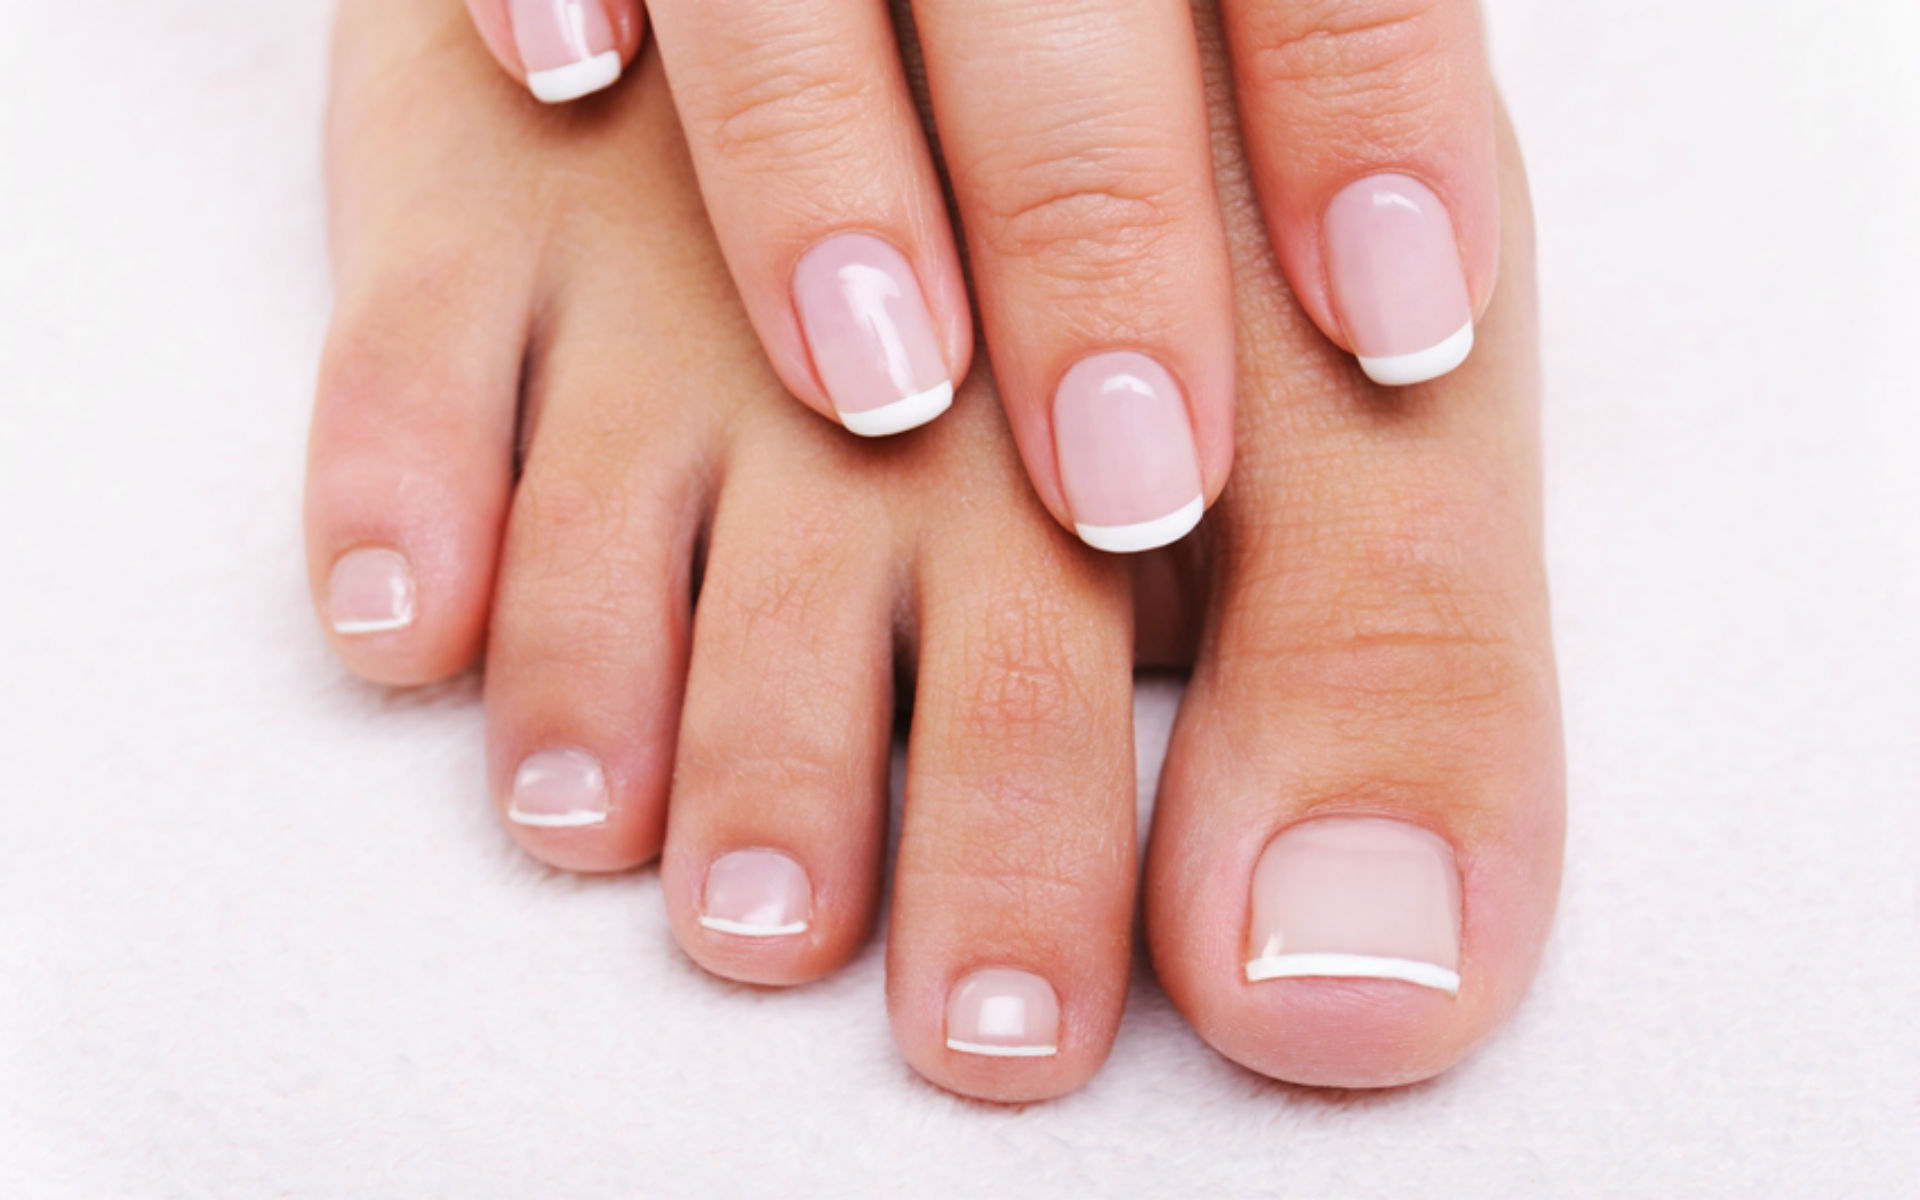 French Manicure and Pedicure Straipsniai.lt